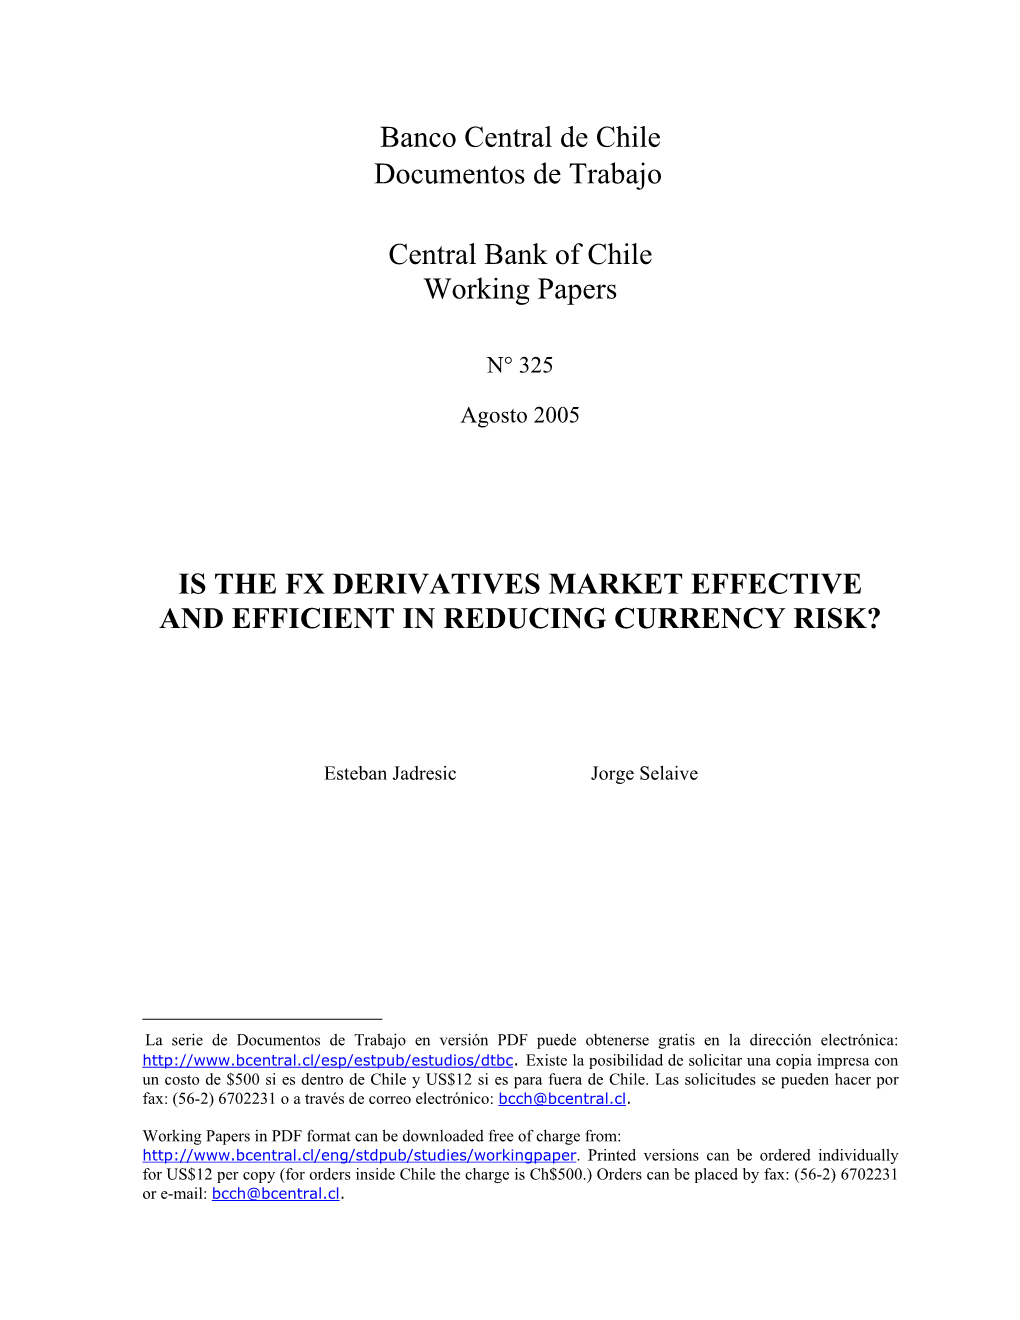 Is the Fx Derivatives Market Effective and Efficient in Reducing Currency Risk?